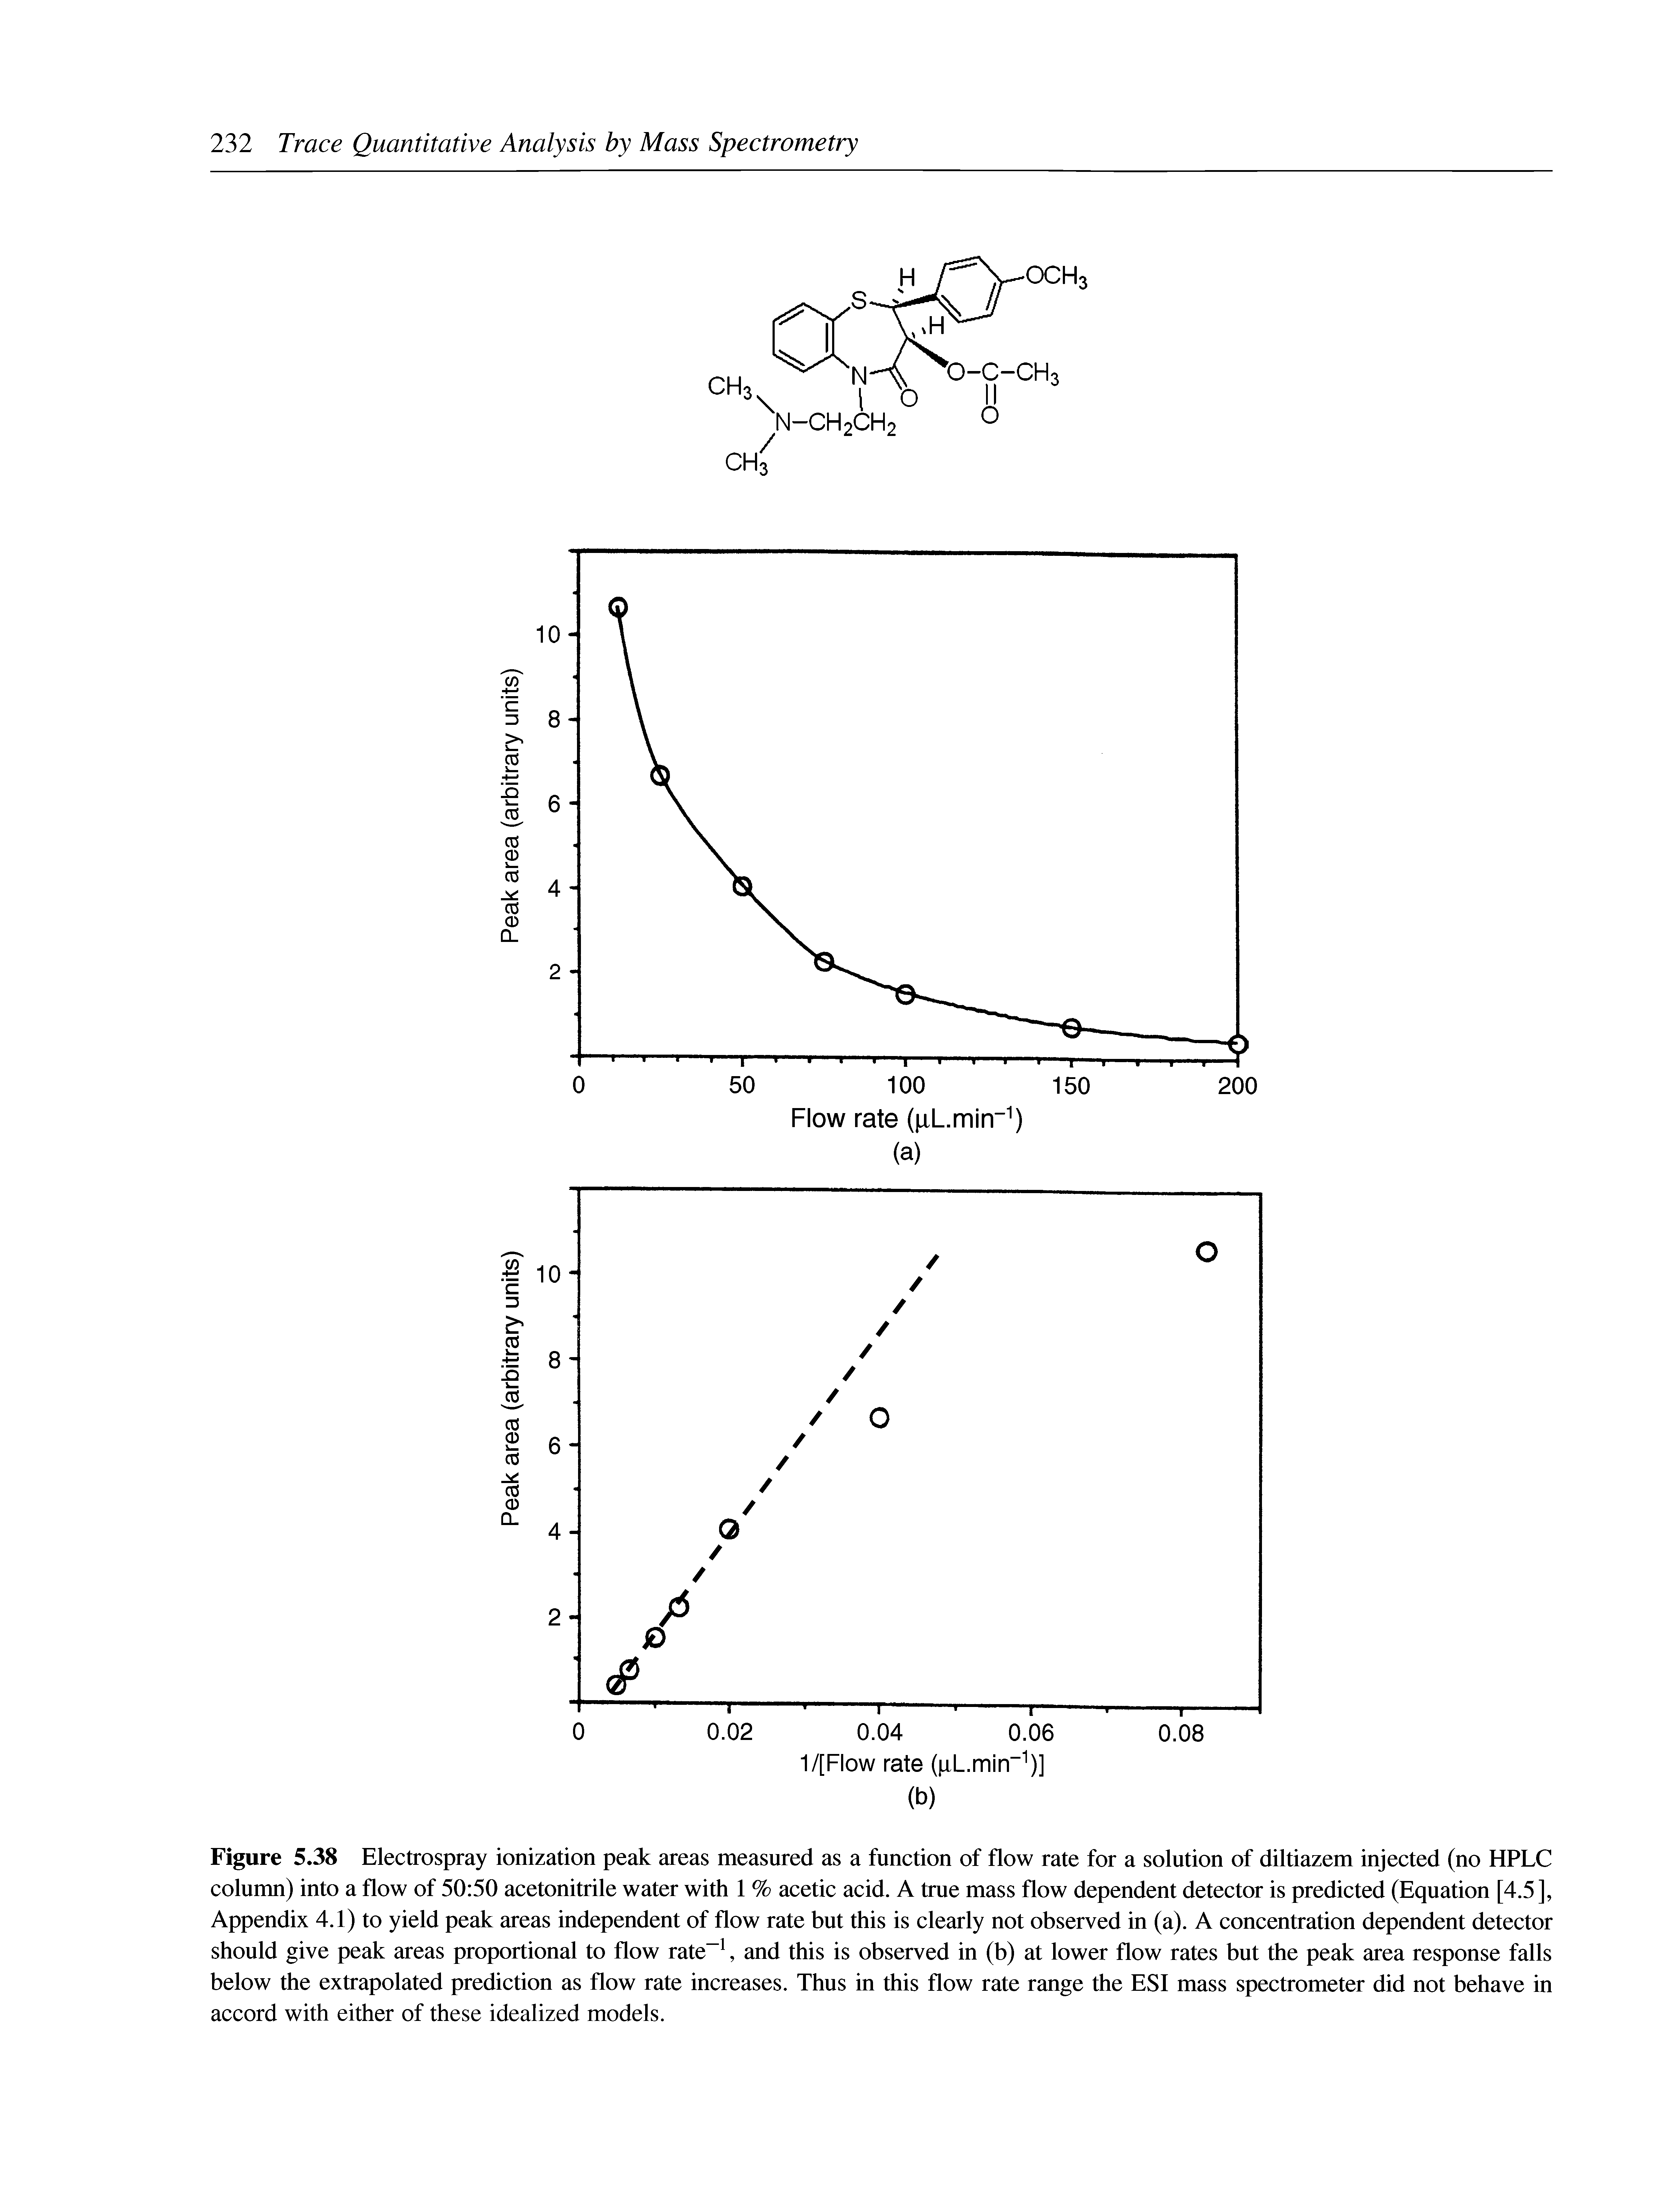 Figure 5.38 Electrospray ionization peak areas measured as a function of flow rate for a solution of diltiazem injected (no HPLC column) into a flow of 50 50 acetonitrile water with 1 % acetic acid. A true mass flow dependent detector is predicted (Equation [4.5], Appendix 4.1) to yield peak areas independent of flow rate but this is clearly not observed in (a). A concentration dependent detector should give peak areas proportional to flow rate , and this is observed in (b) at lower flow rates but the peak area response falls below the extrapolated prediction as flow rate increases. Thus in this flow rate range the ESI mass spectrometer did not behave in accord with either of these idealized models.